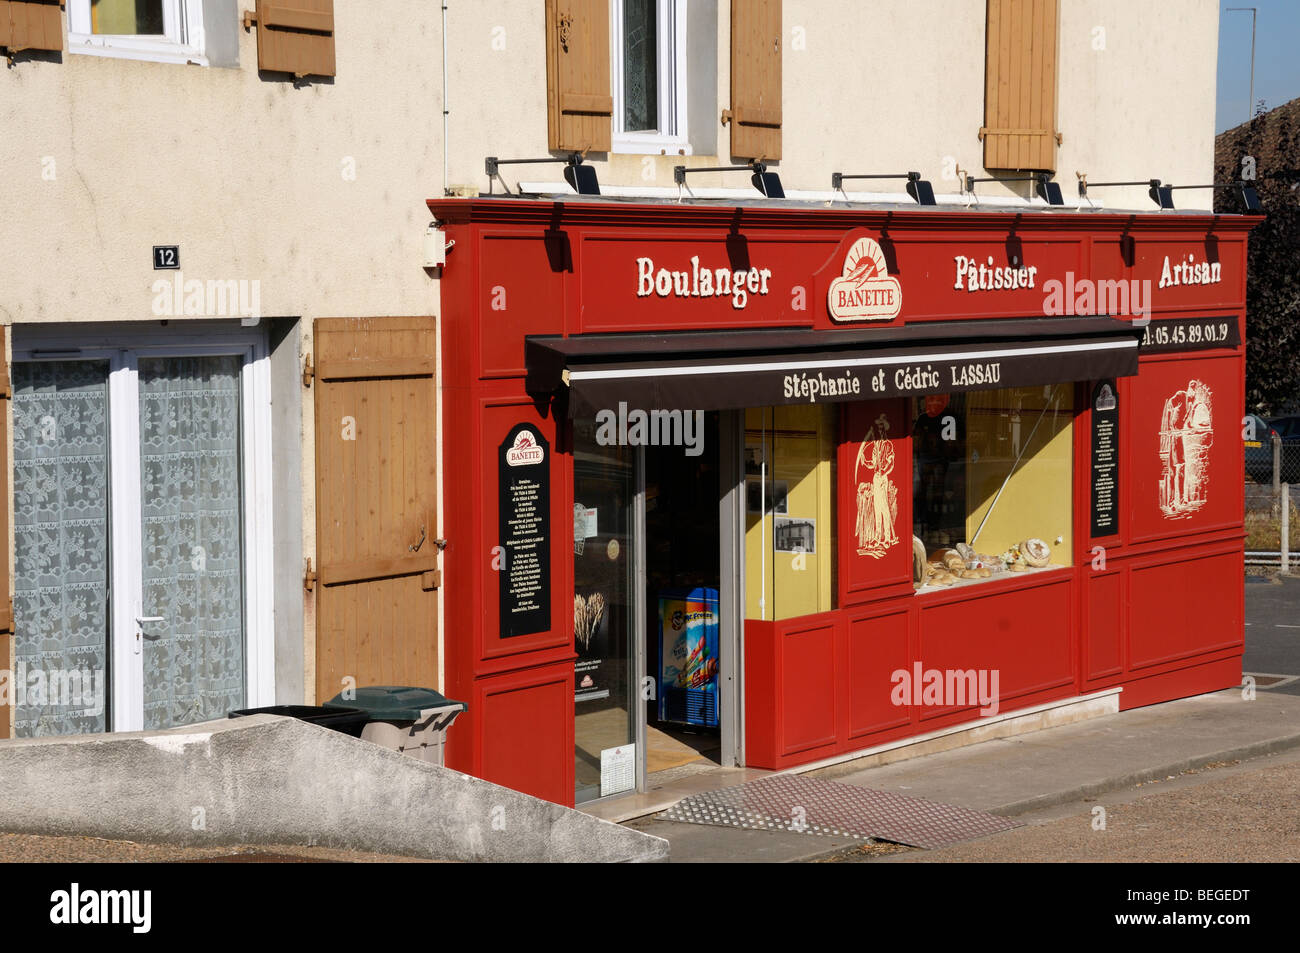 Stock photo of a french bread shop in Chabanais, France. Stock Photo